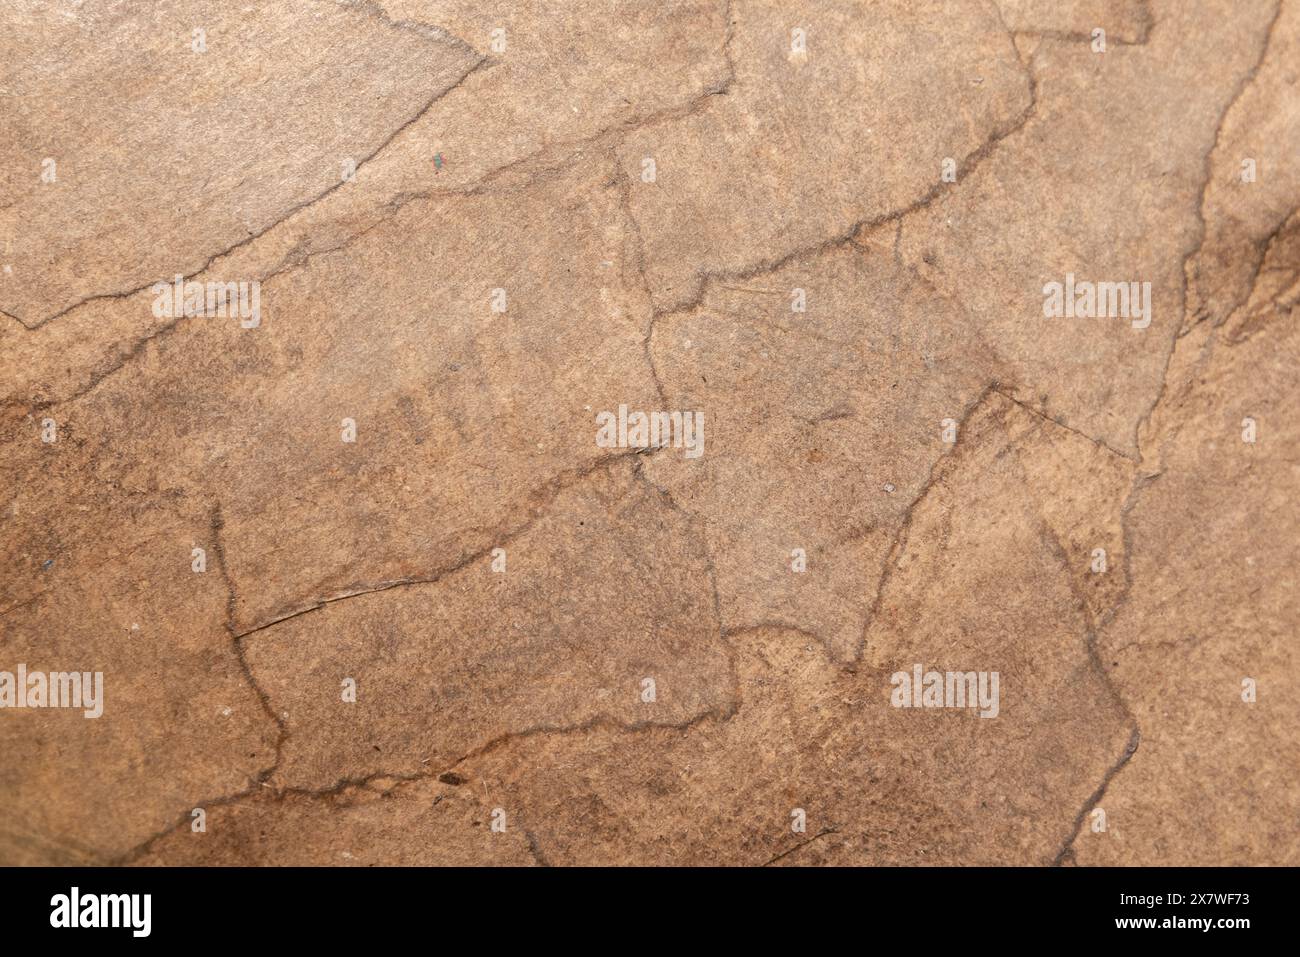 Background texture of paper mache, a composite material consisting of paper pieces or pulp, sometimes reinforced with textiles, and bound with an adhe Stock Photo